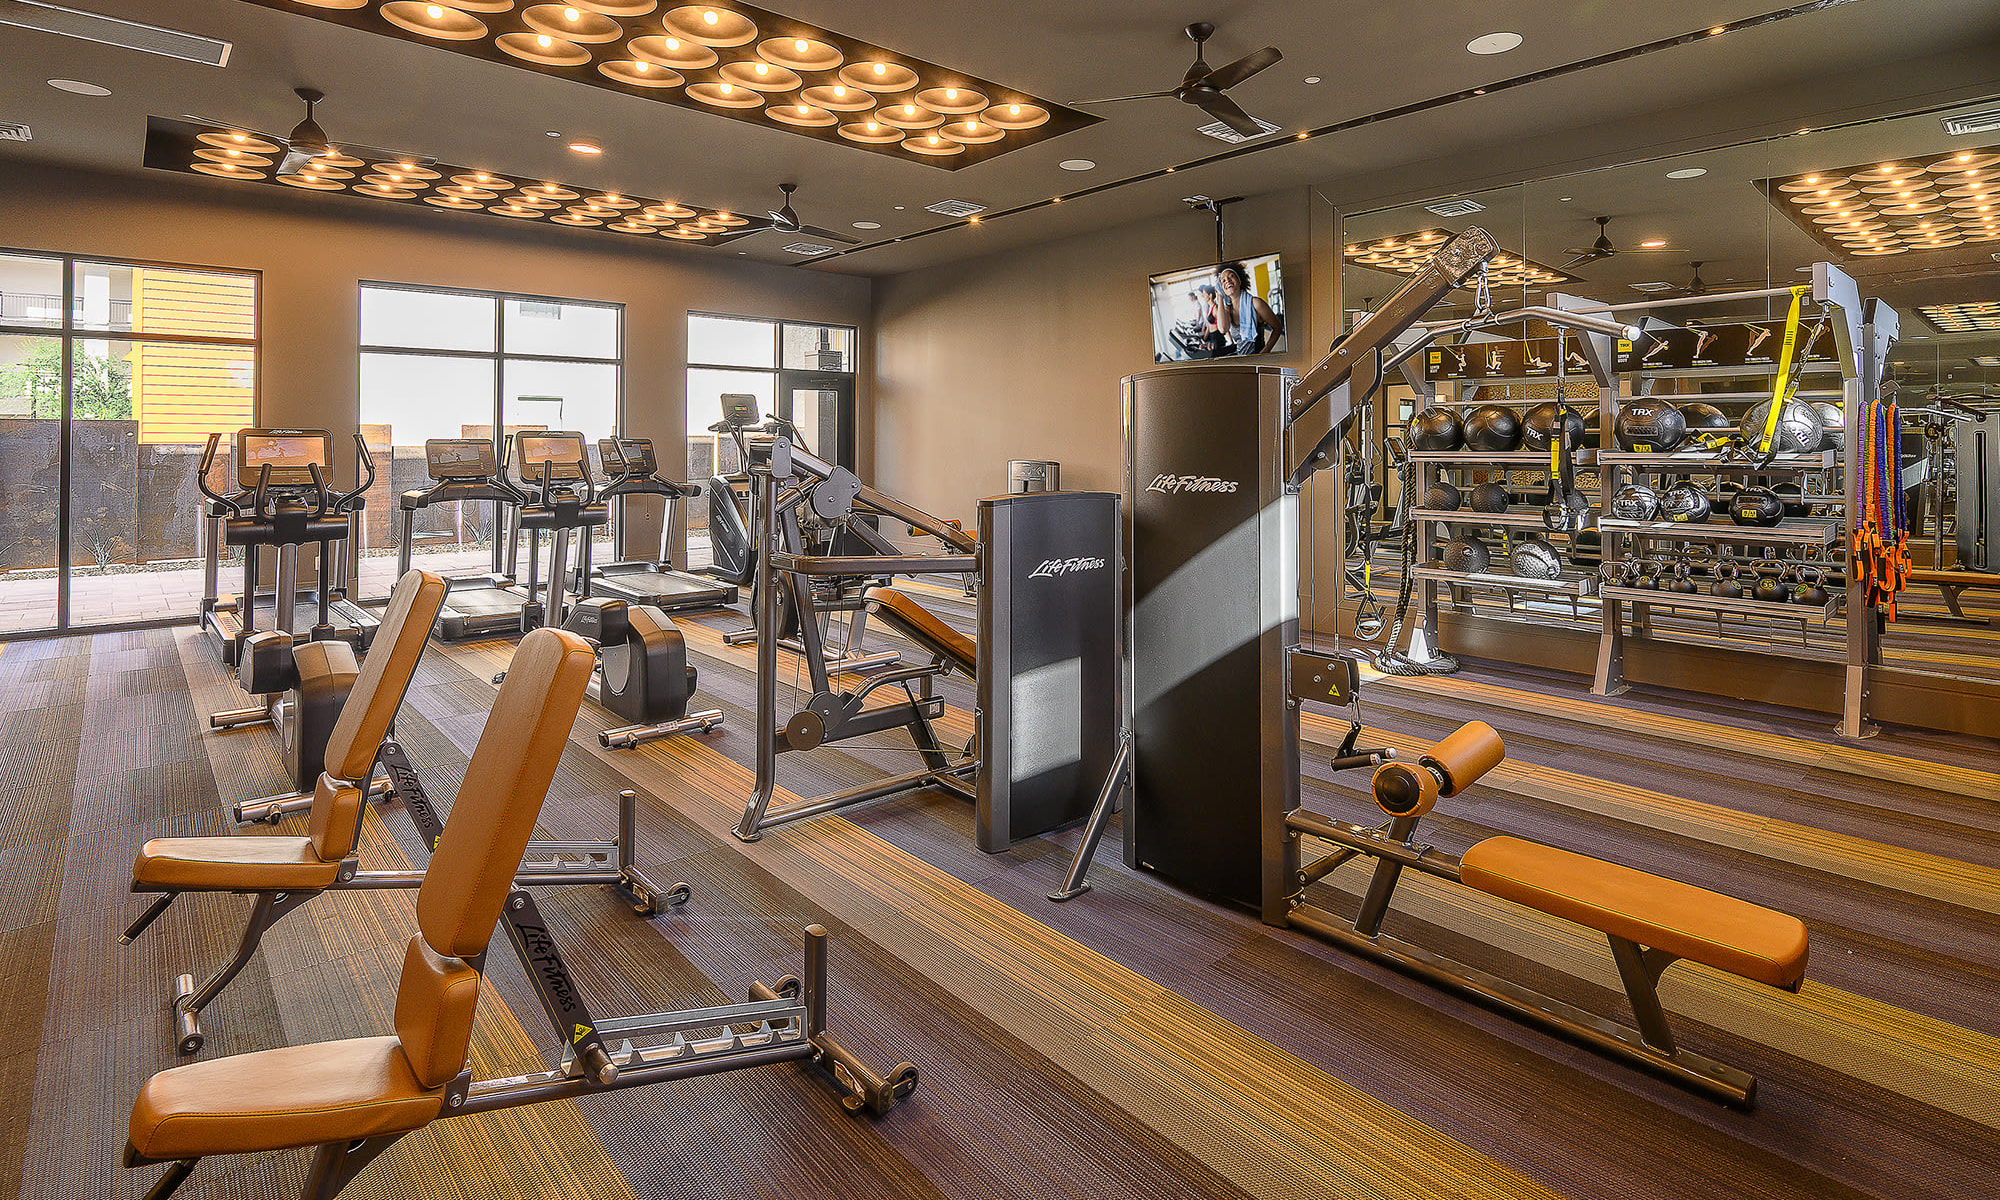 Enjoy apartments with a gym at Sentio in Glendale, Arizona